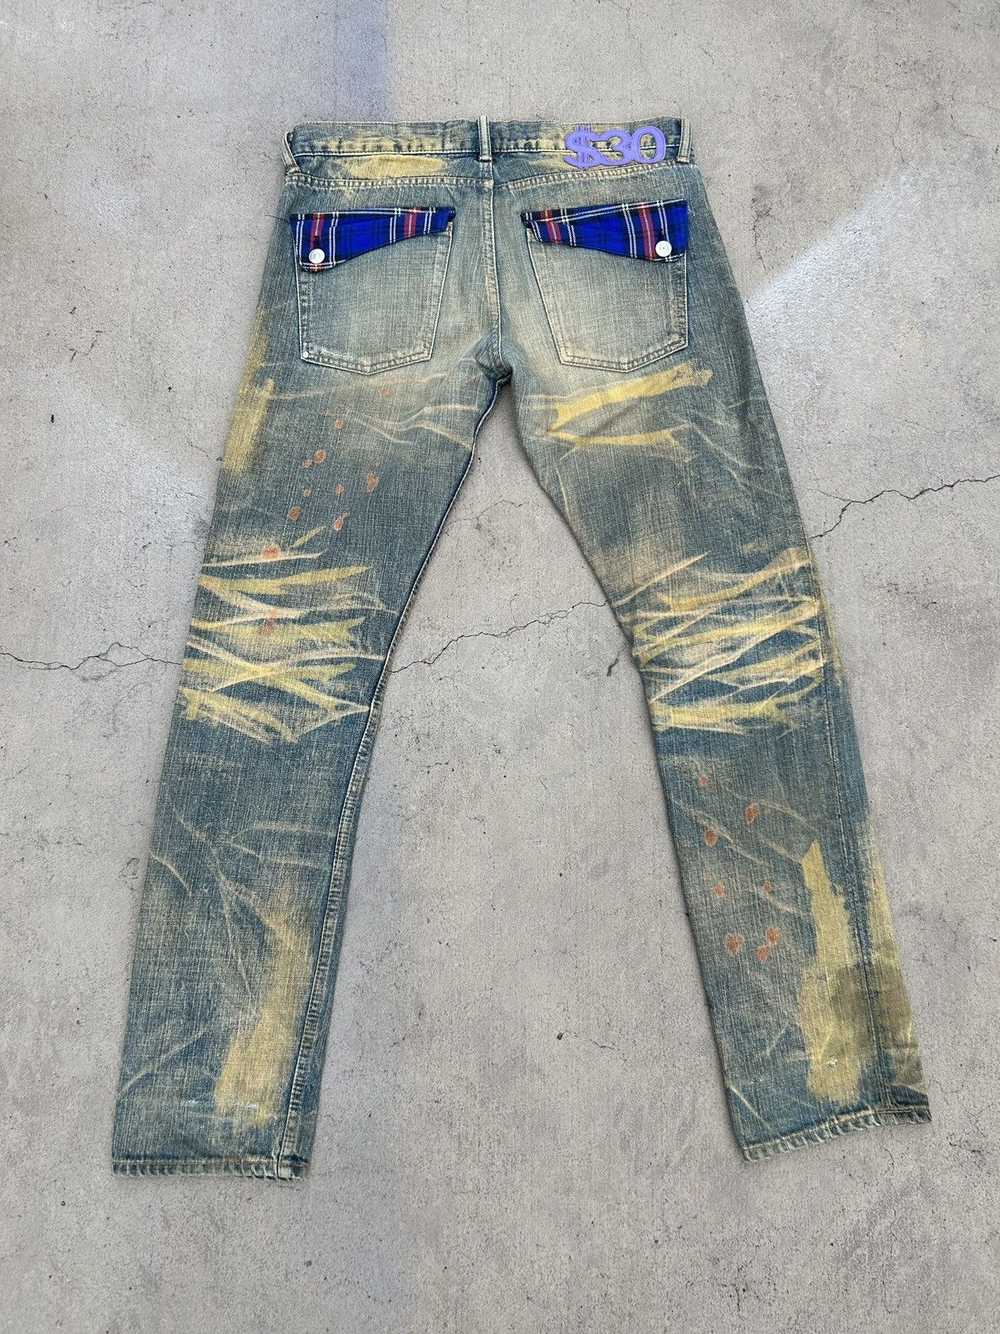 Swagger Swagger dyed selvedge denim jeans - image 2